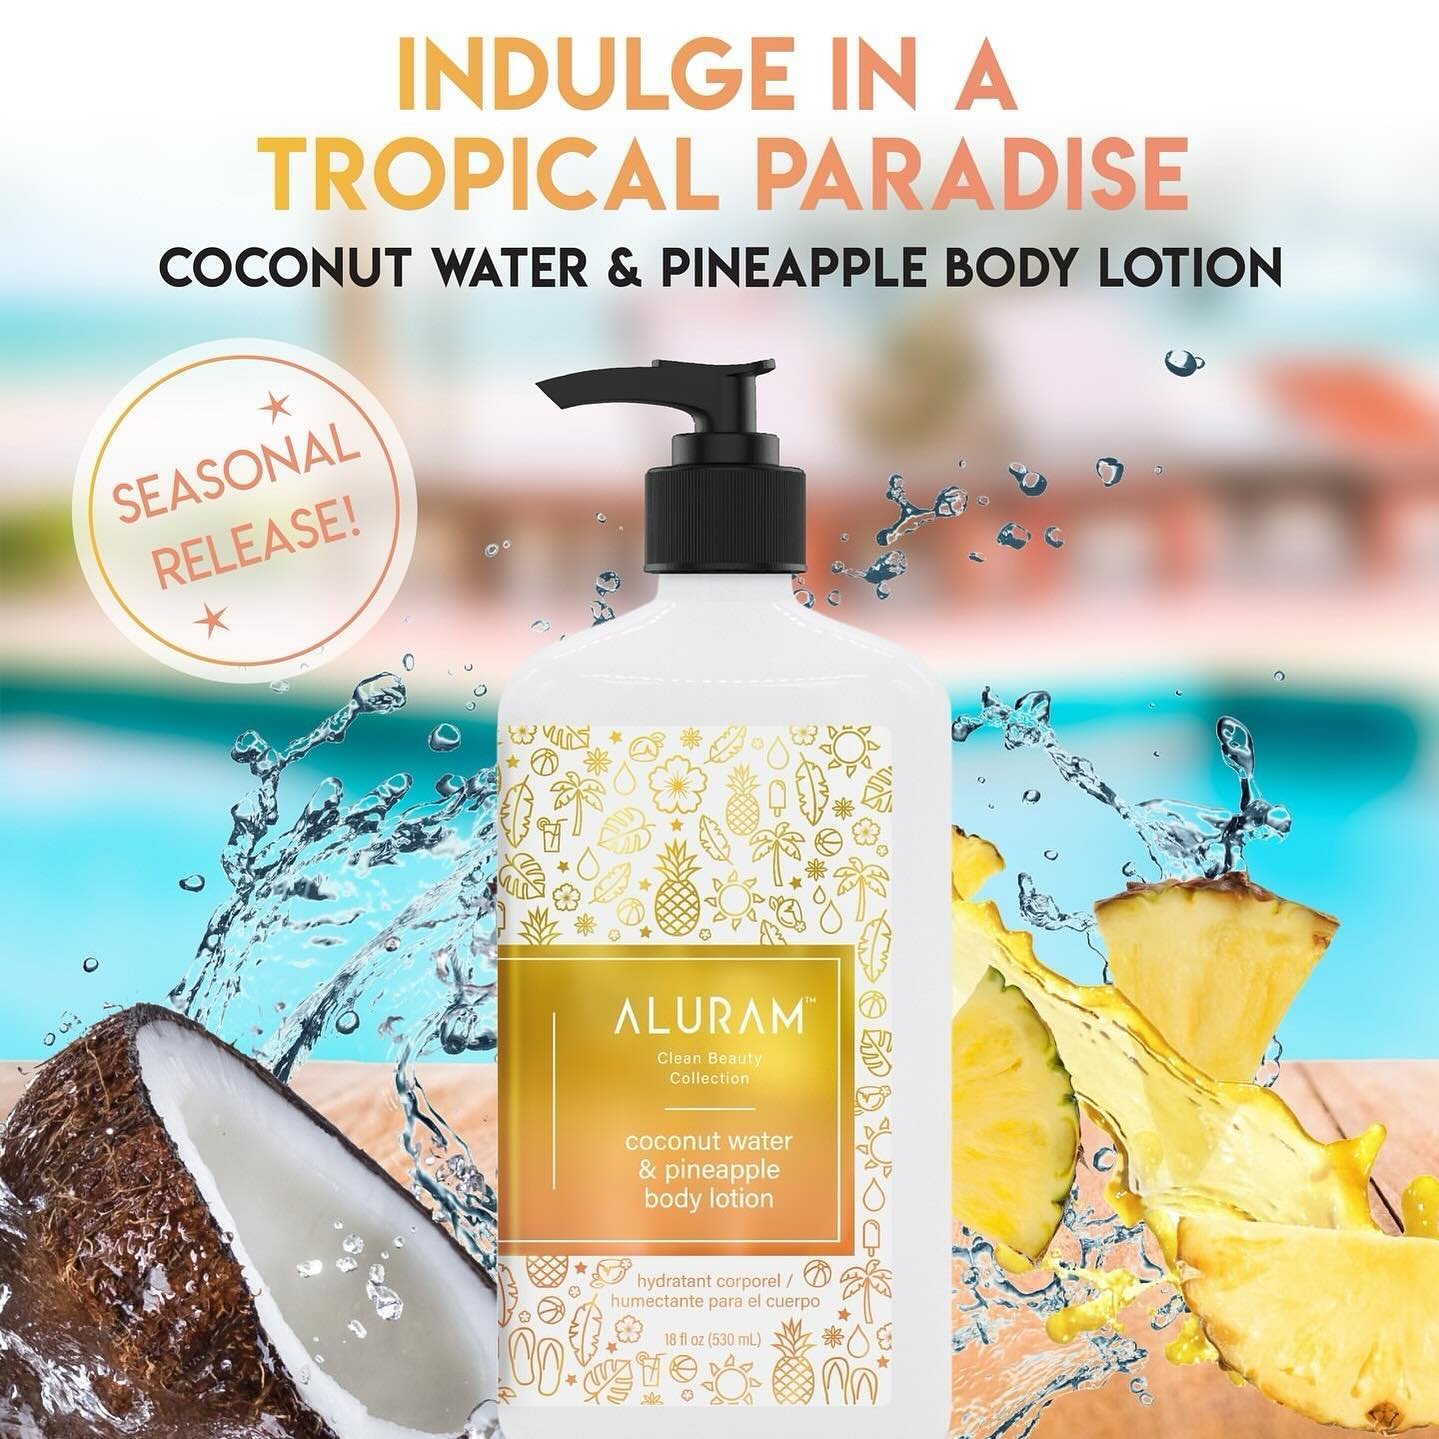 We&rsquo;re here for the tropical vibes ☀️

➡️ Introducing the ⭐️ NEW ⭐️ @alurambeauty Seasonal Release - Coconut Water &amp; Pineapple Body Lotion! 🥥🍍 

Now available at Beauty Craft! 🕺 

This tropical treat is only available for a limited time, 